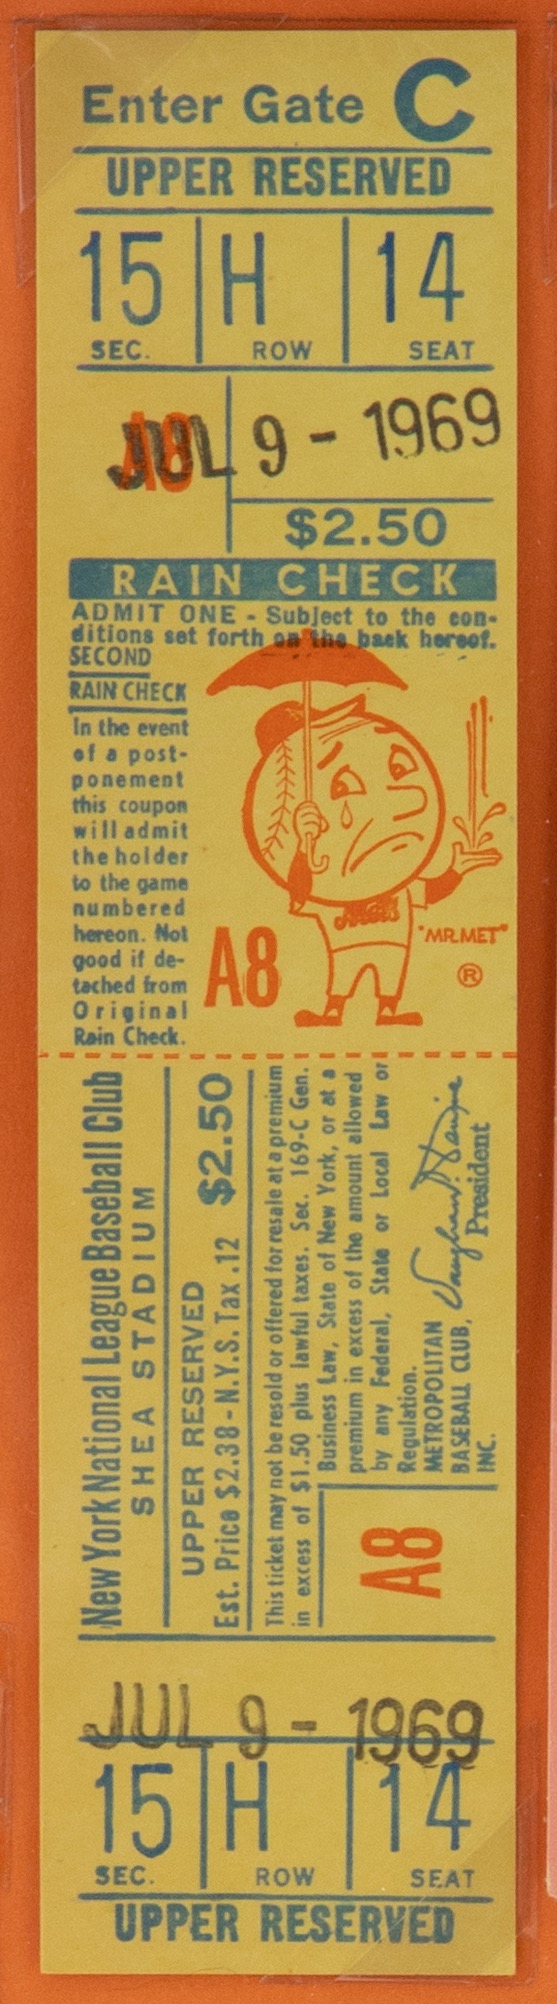 Ticket from Seaver's Near-Perfect Game in 1969